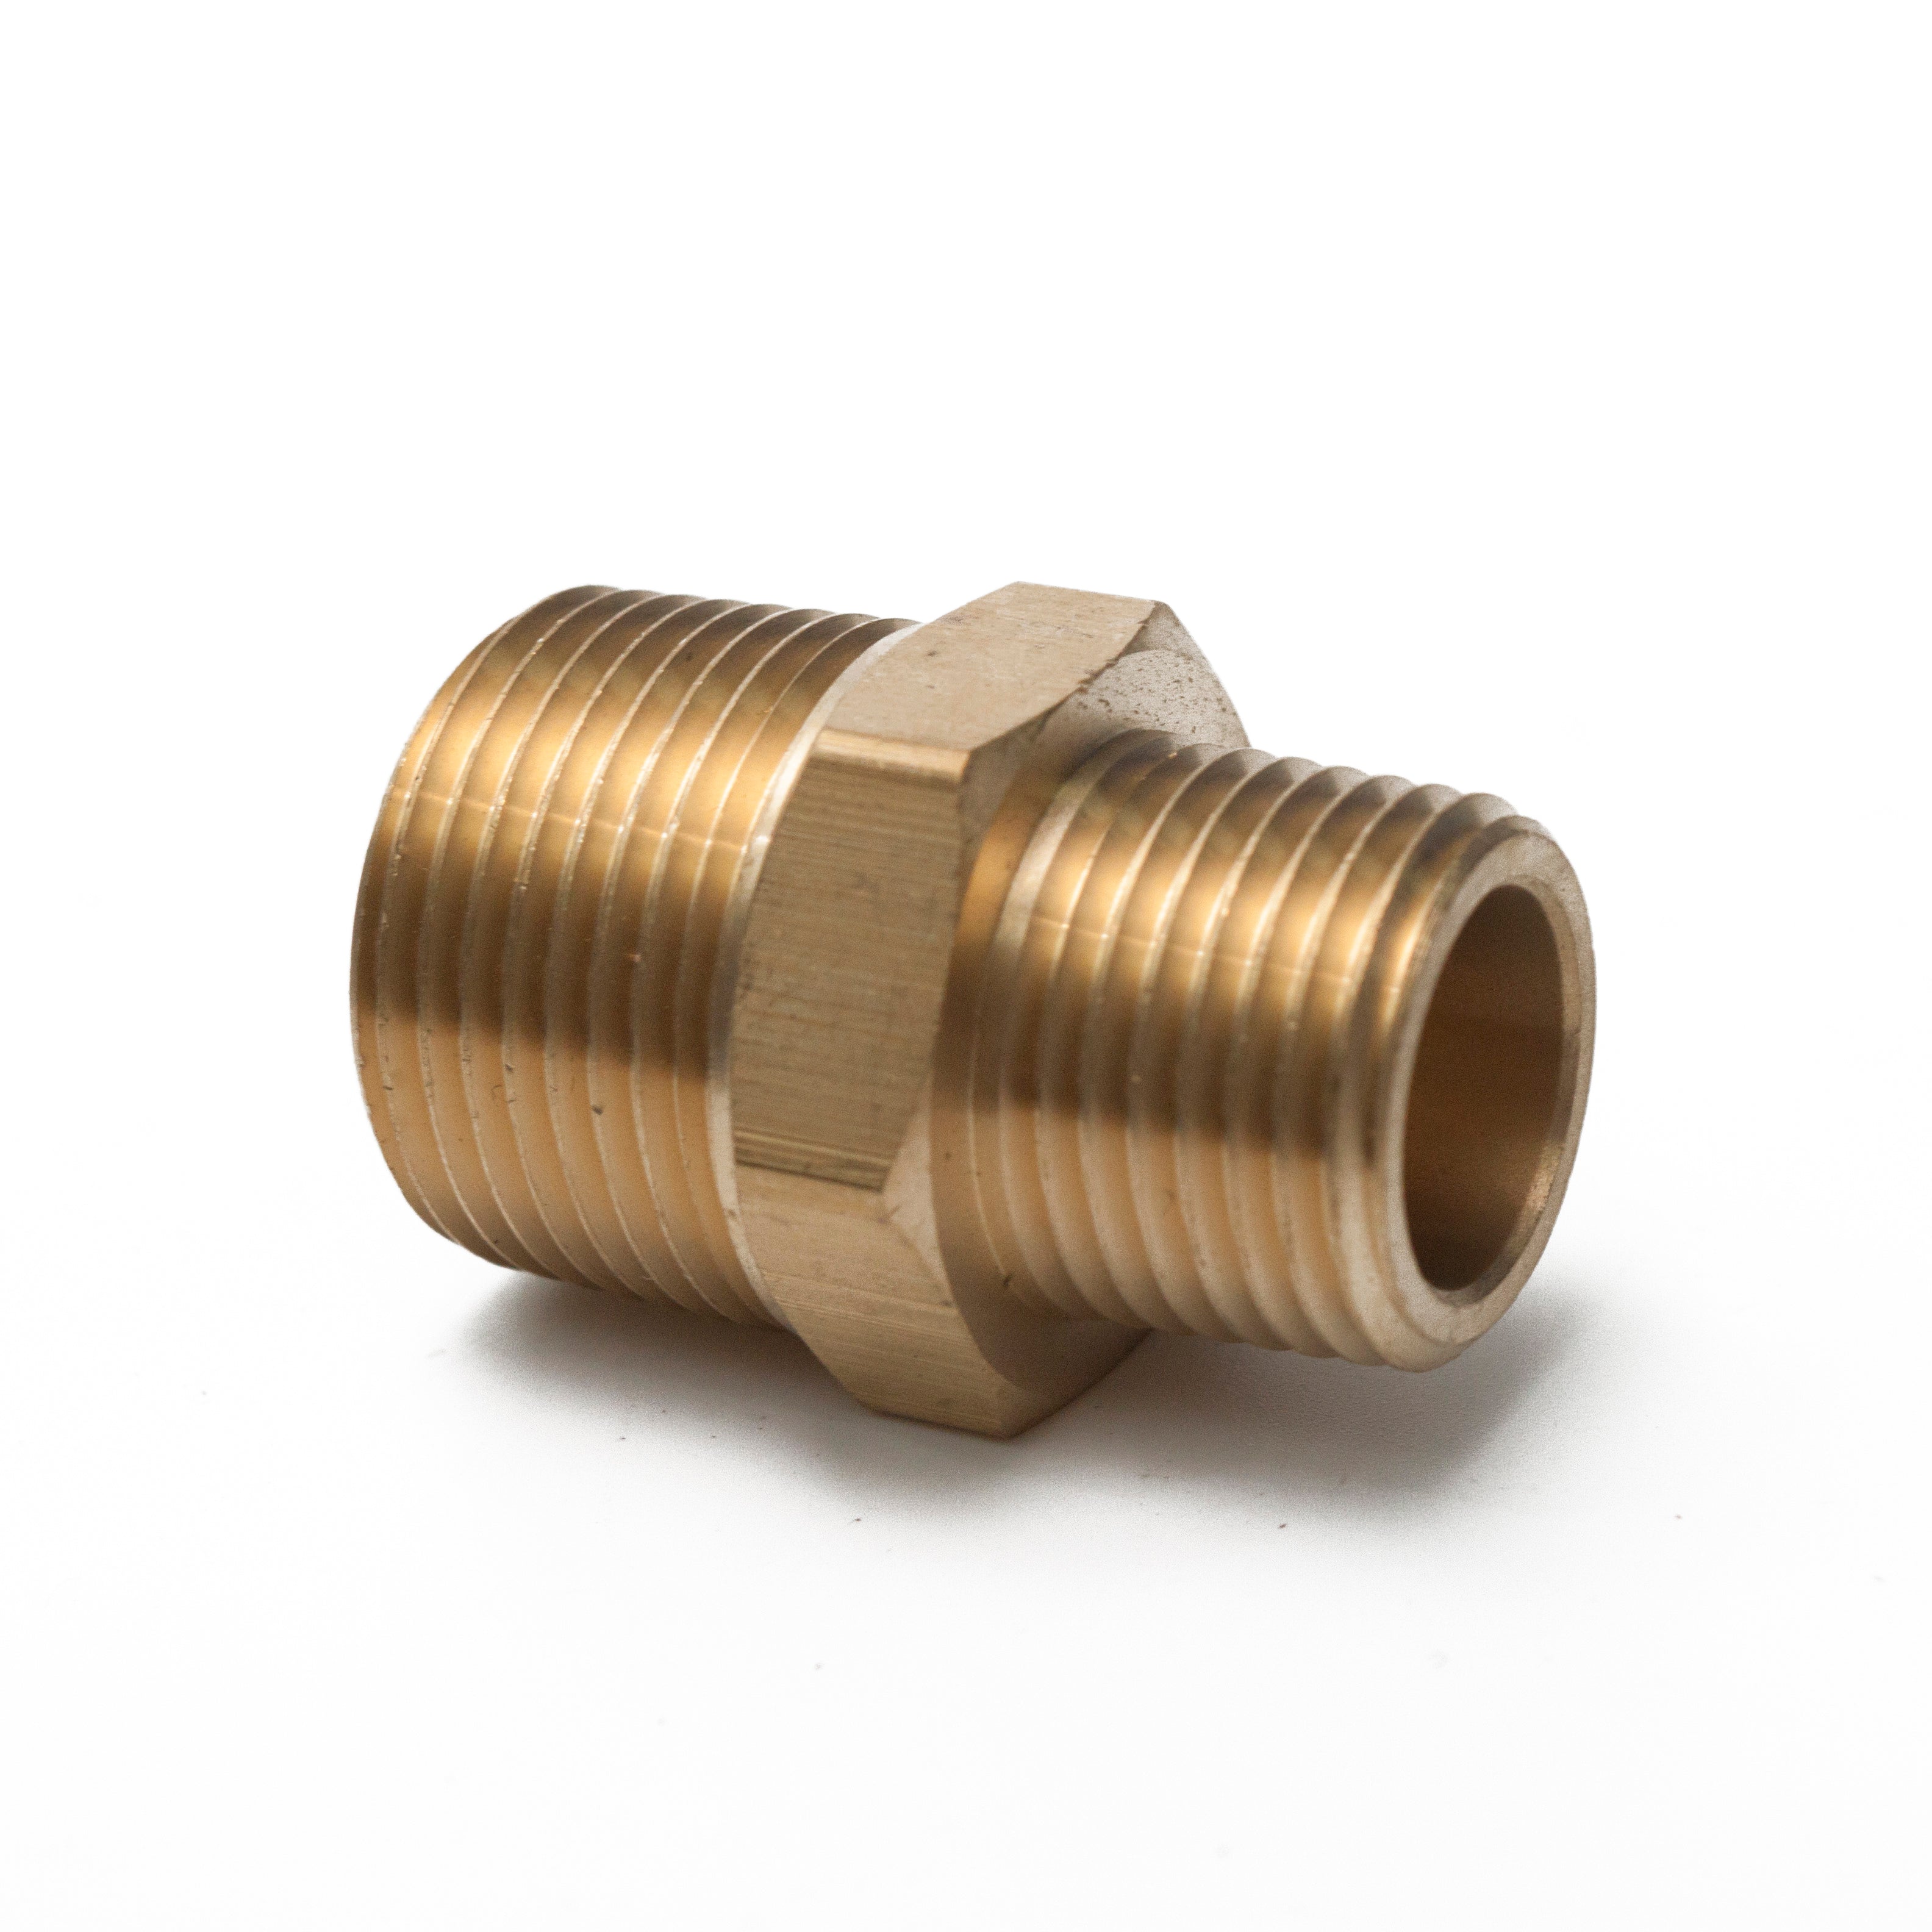 LTWFITTING Brass Pipe Hex Reducing Nipple Fitting 3/4-Inch x 3/8-Inch Male BSPT (Pack of 25)